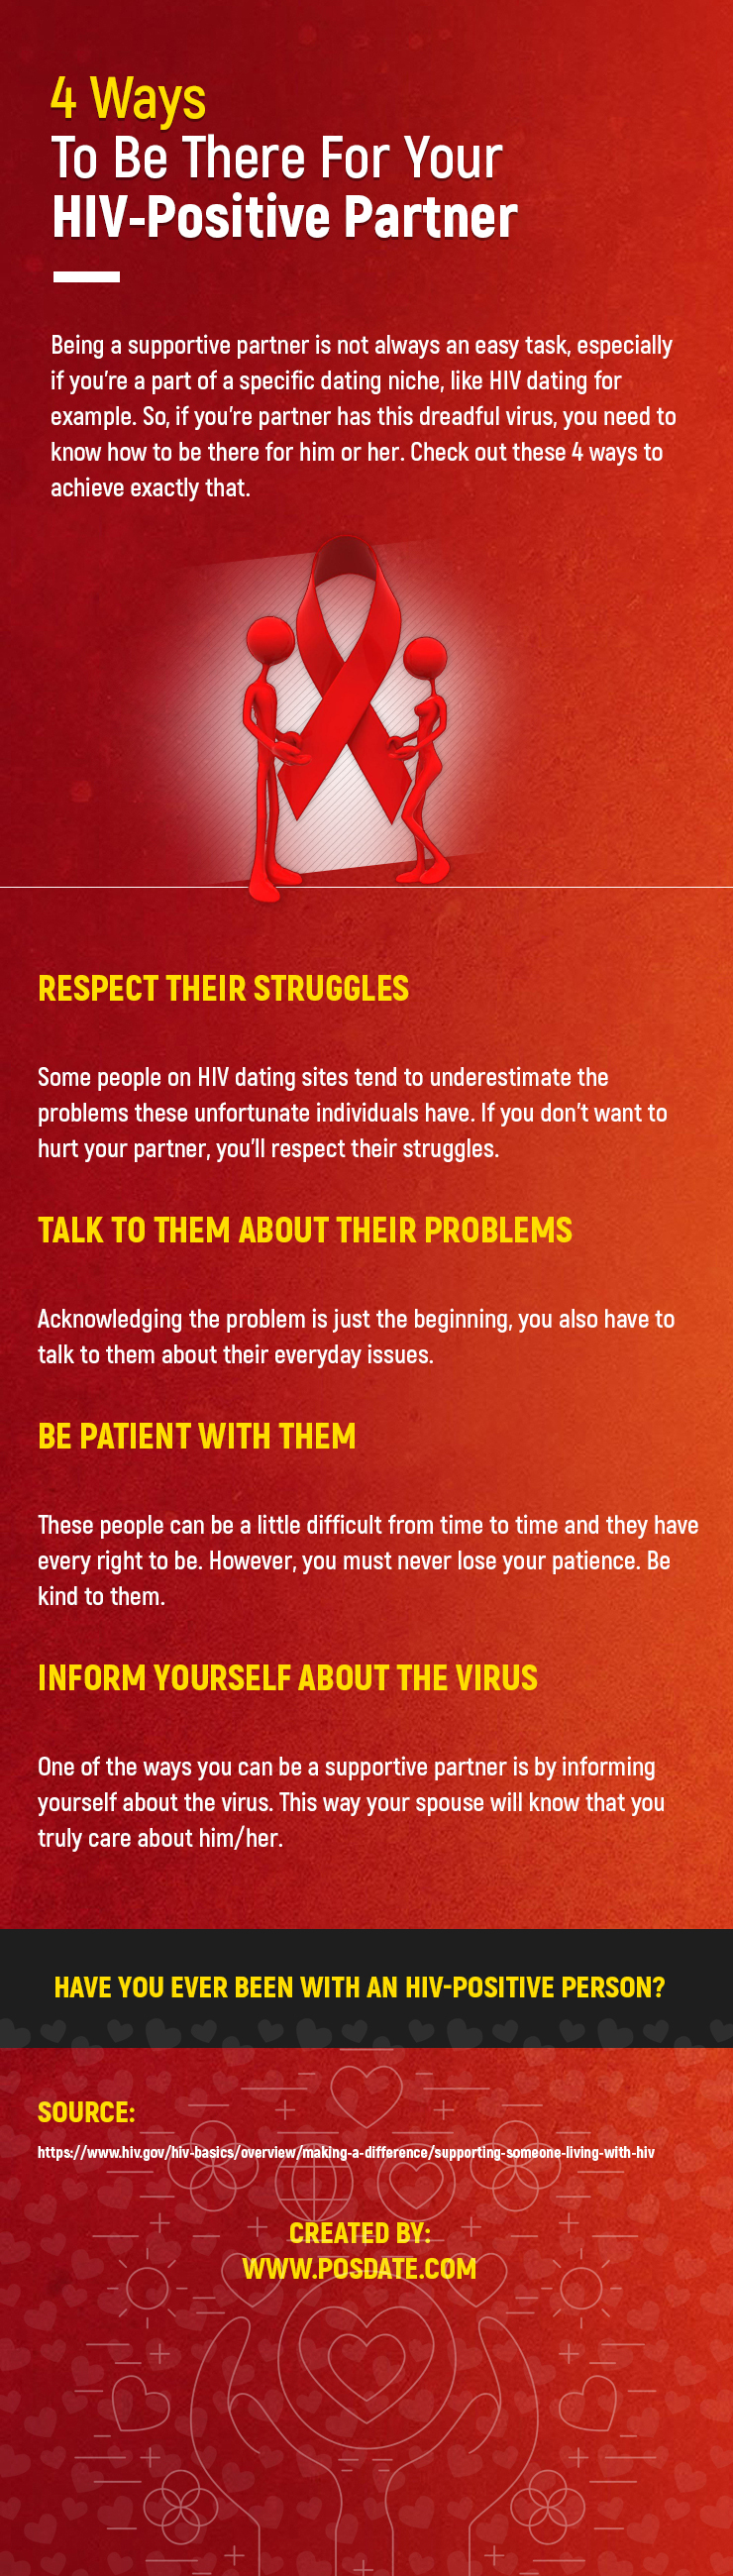 4 Ways To Be There For Your HIV Positive Partner